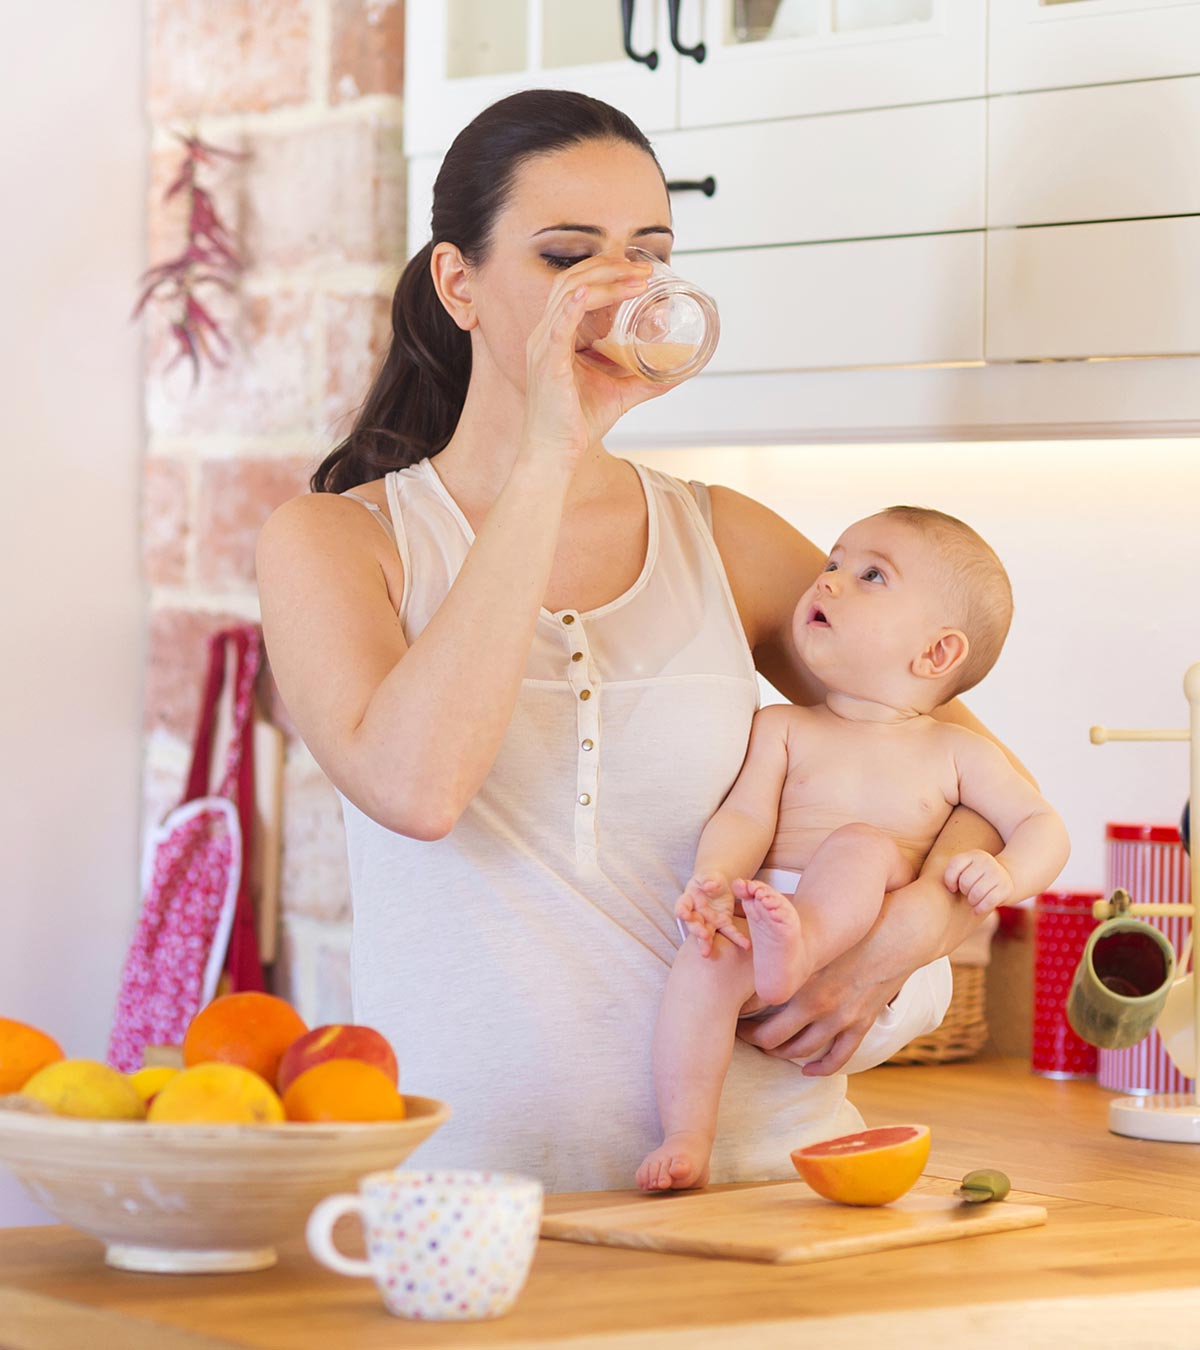 Post Pregnancy Diet: 22 Must-Have Foods For New Moms